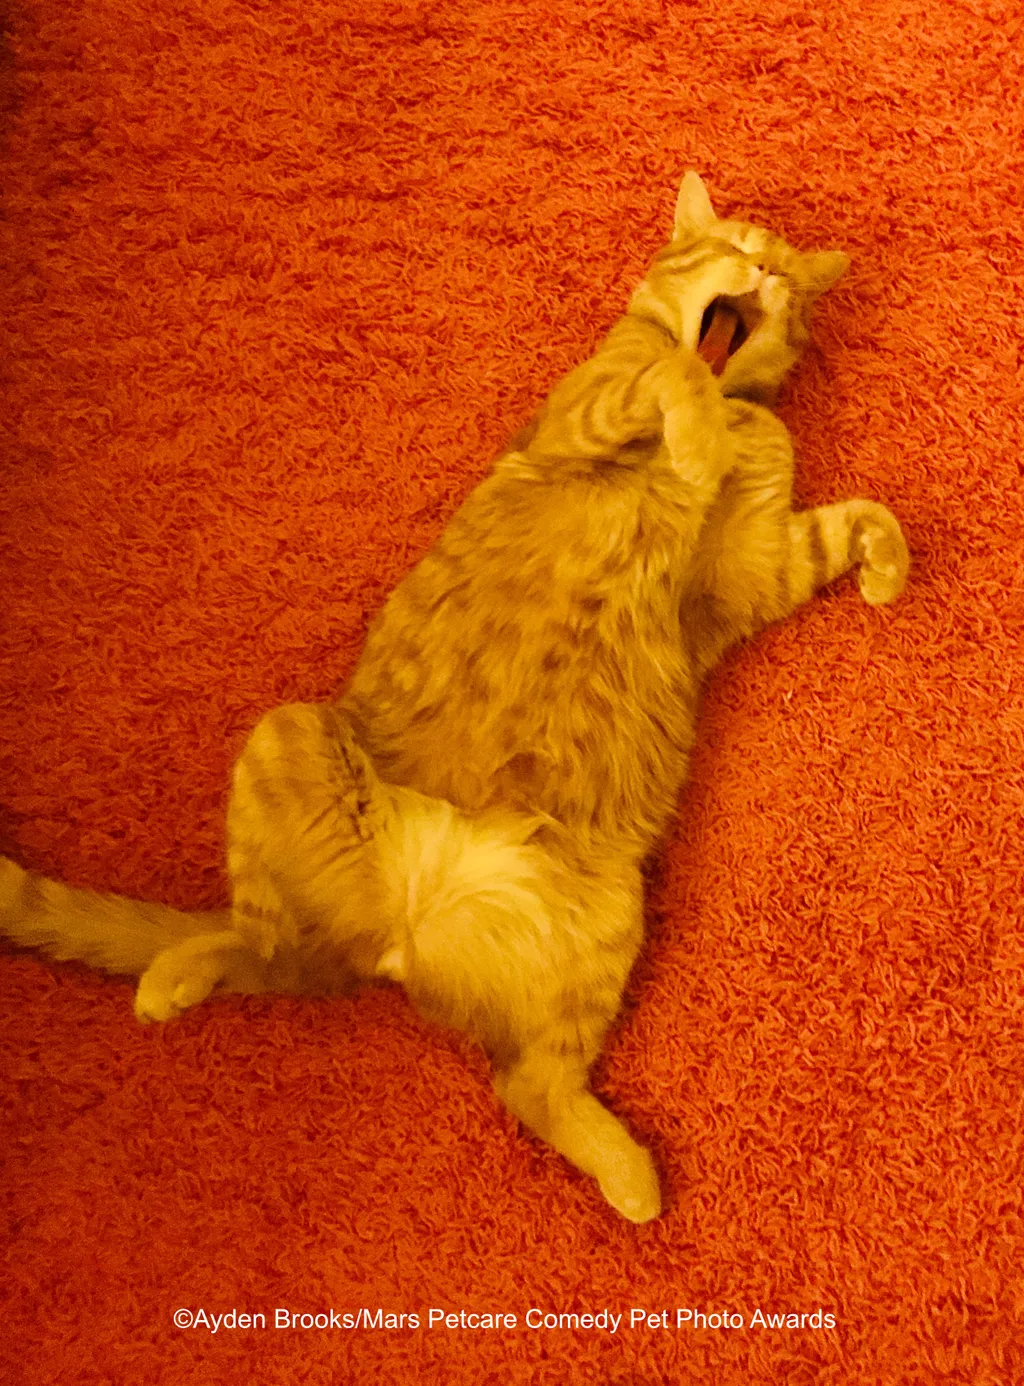 The Comedy Pet Photography Awards 2020
Lisa Greenspoon
ottawa
Canada
Phone: 
Email: 
Title: Good morning, Fox Mulder!
Description: Our cat, Fox Mulder, AKA Squishy, Little Squishy Guy, Squishface, Squish, Foxy, loves to spread himself out on his back when